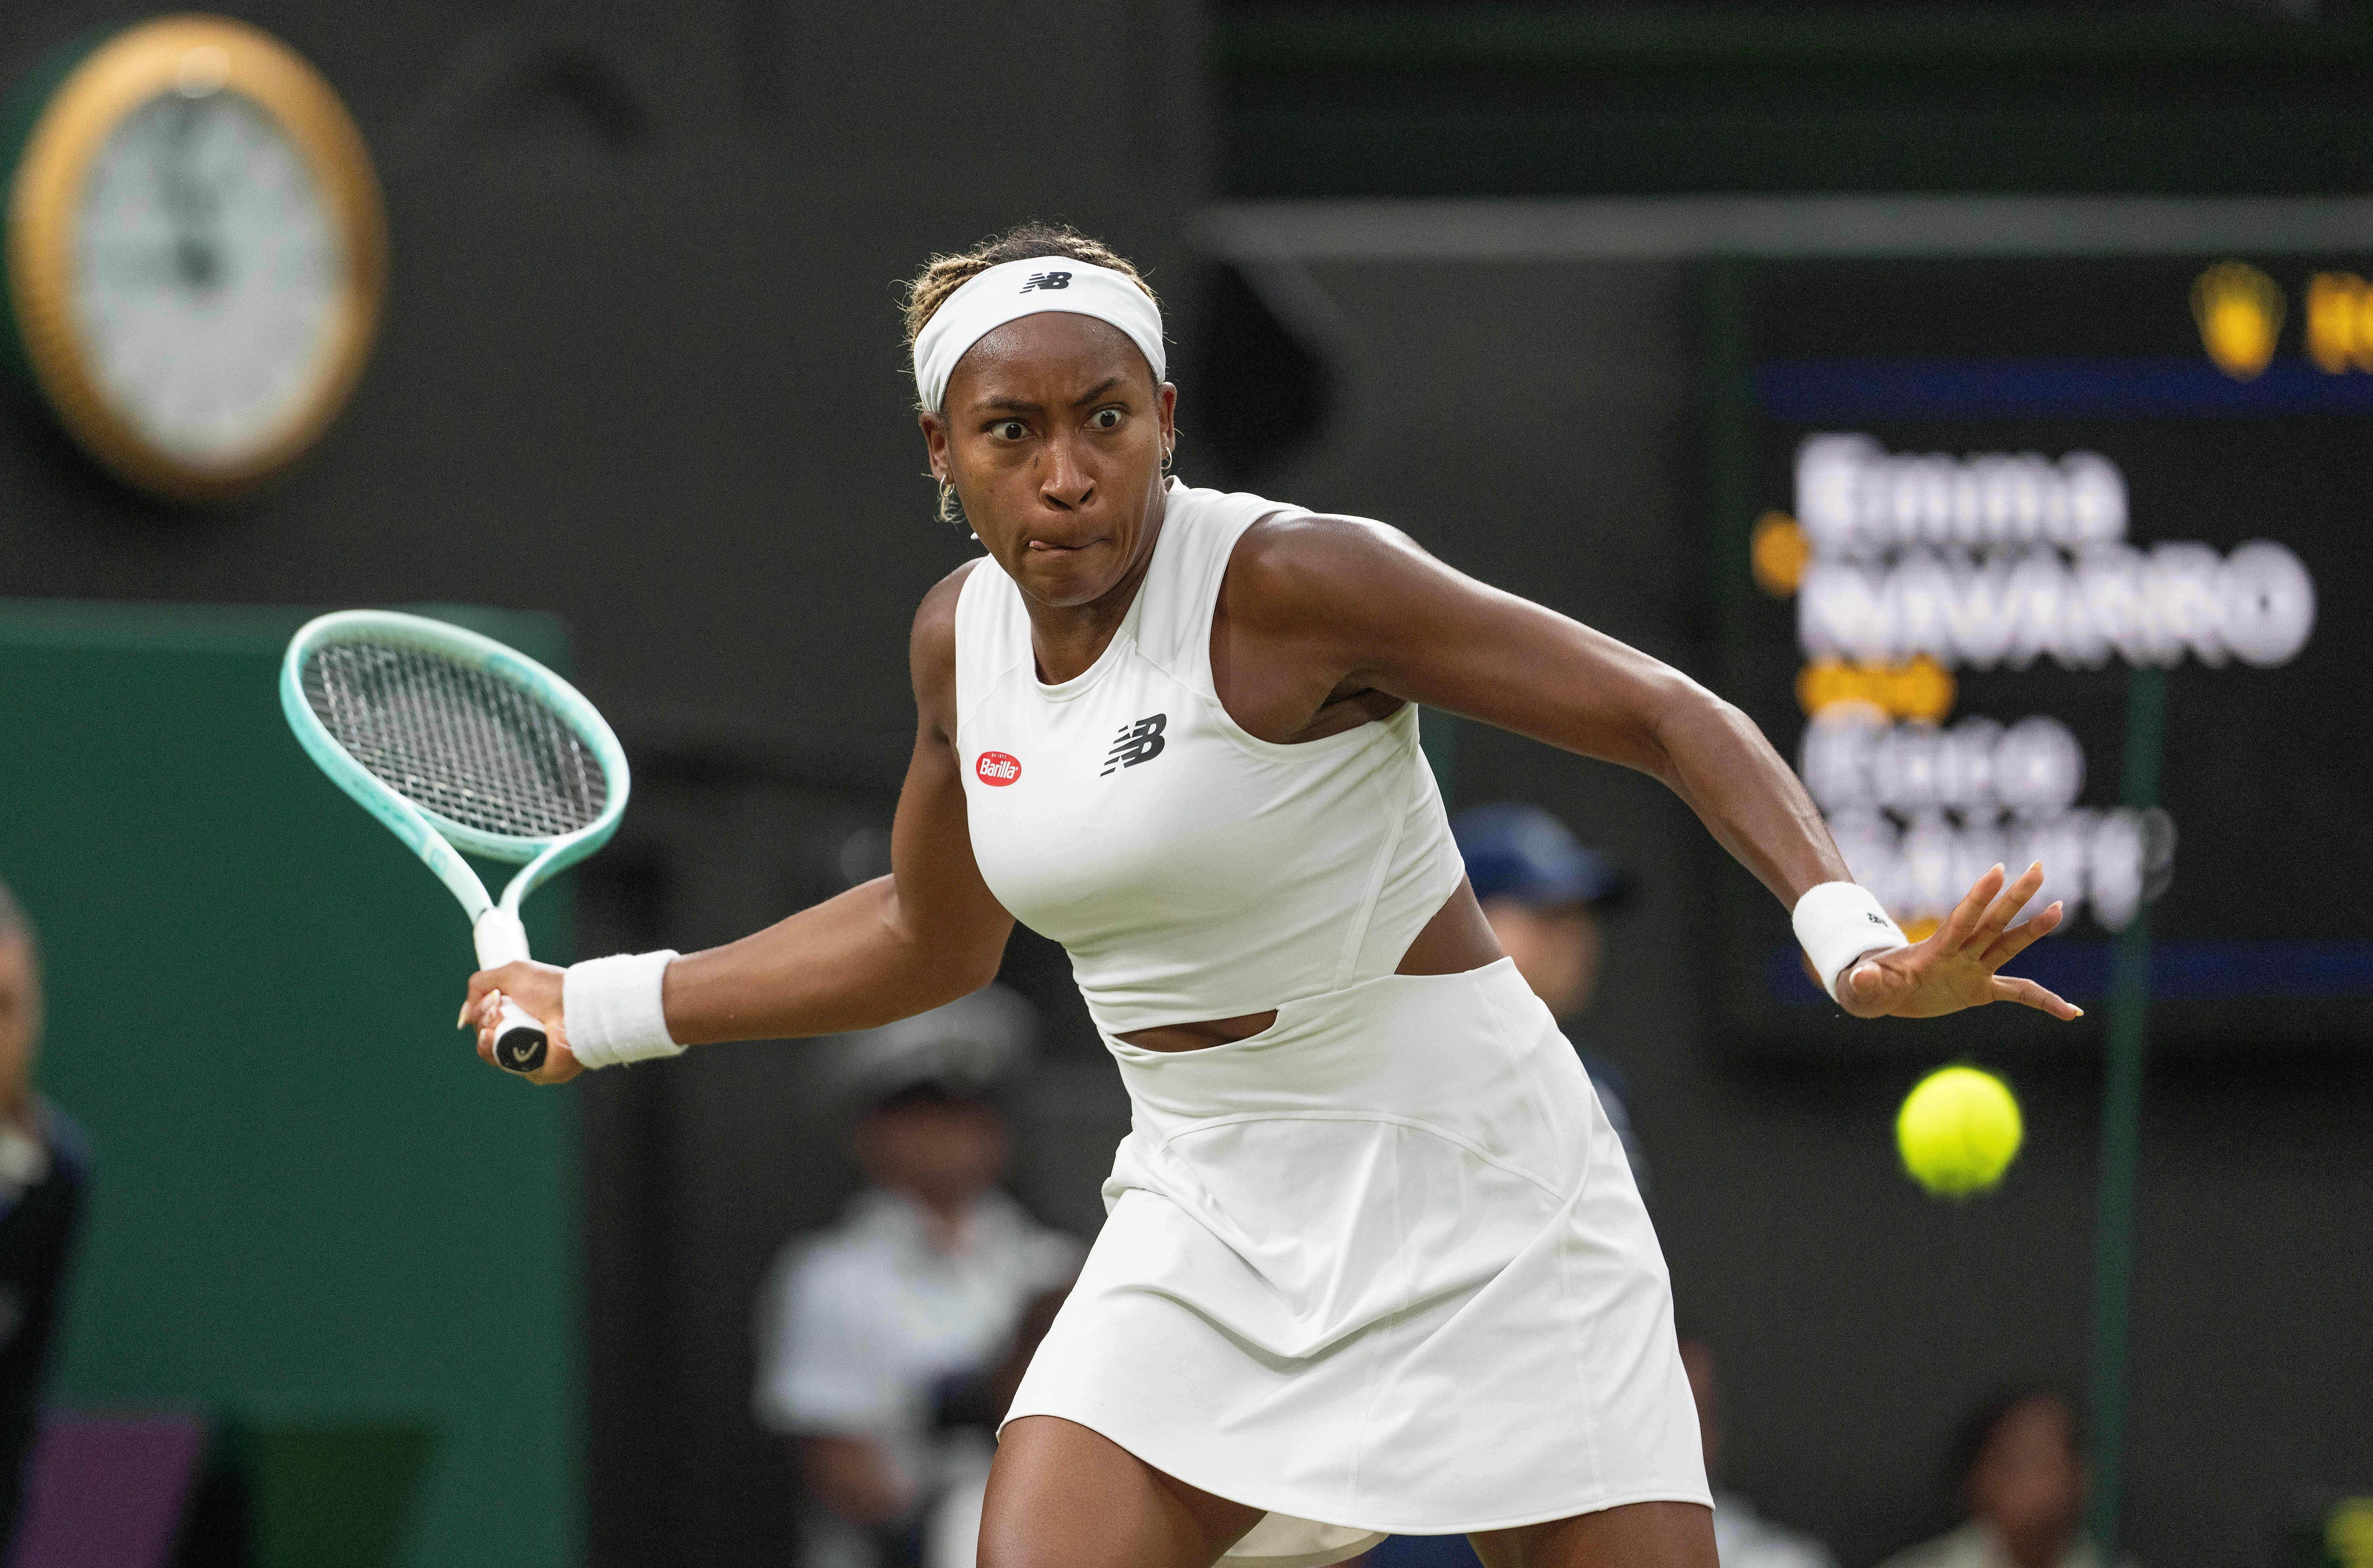 Delray tennis star Coco Gauff is flag bearer at Opening Ceremony for US Olympics team